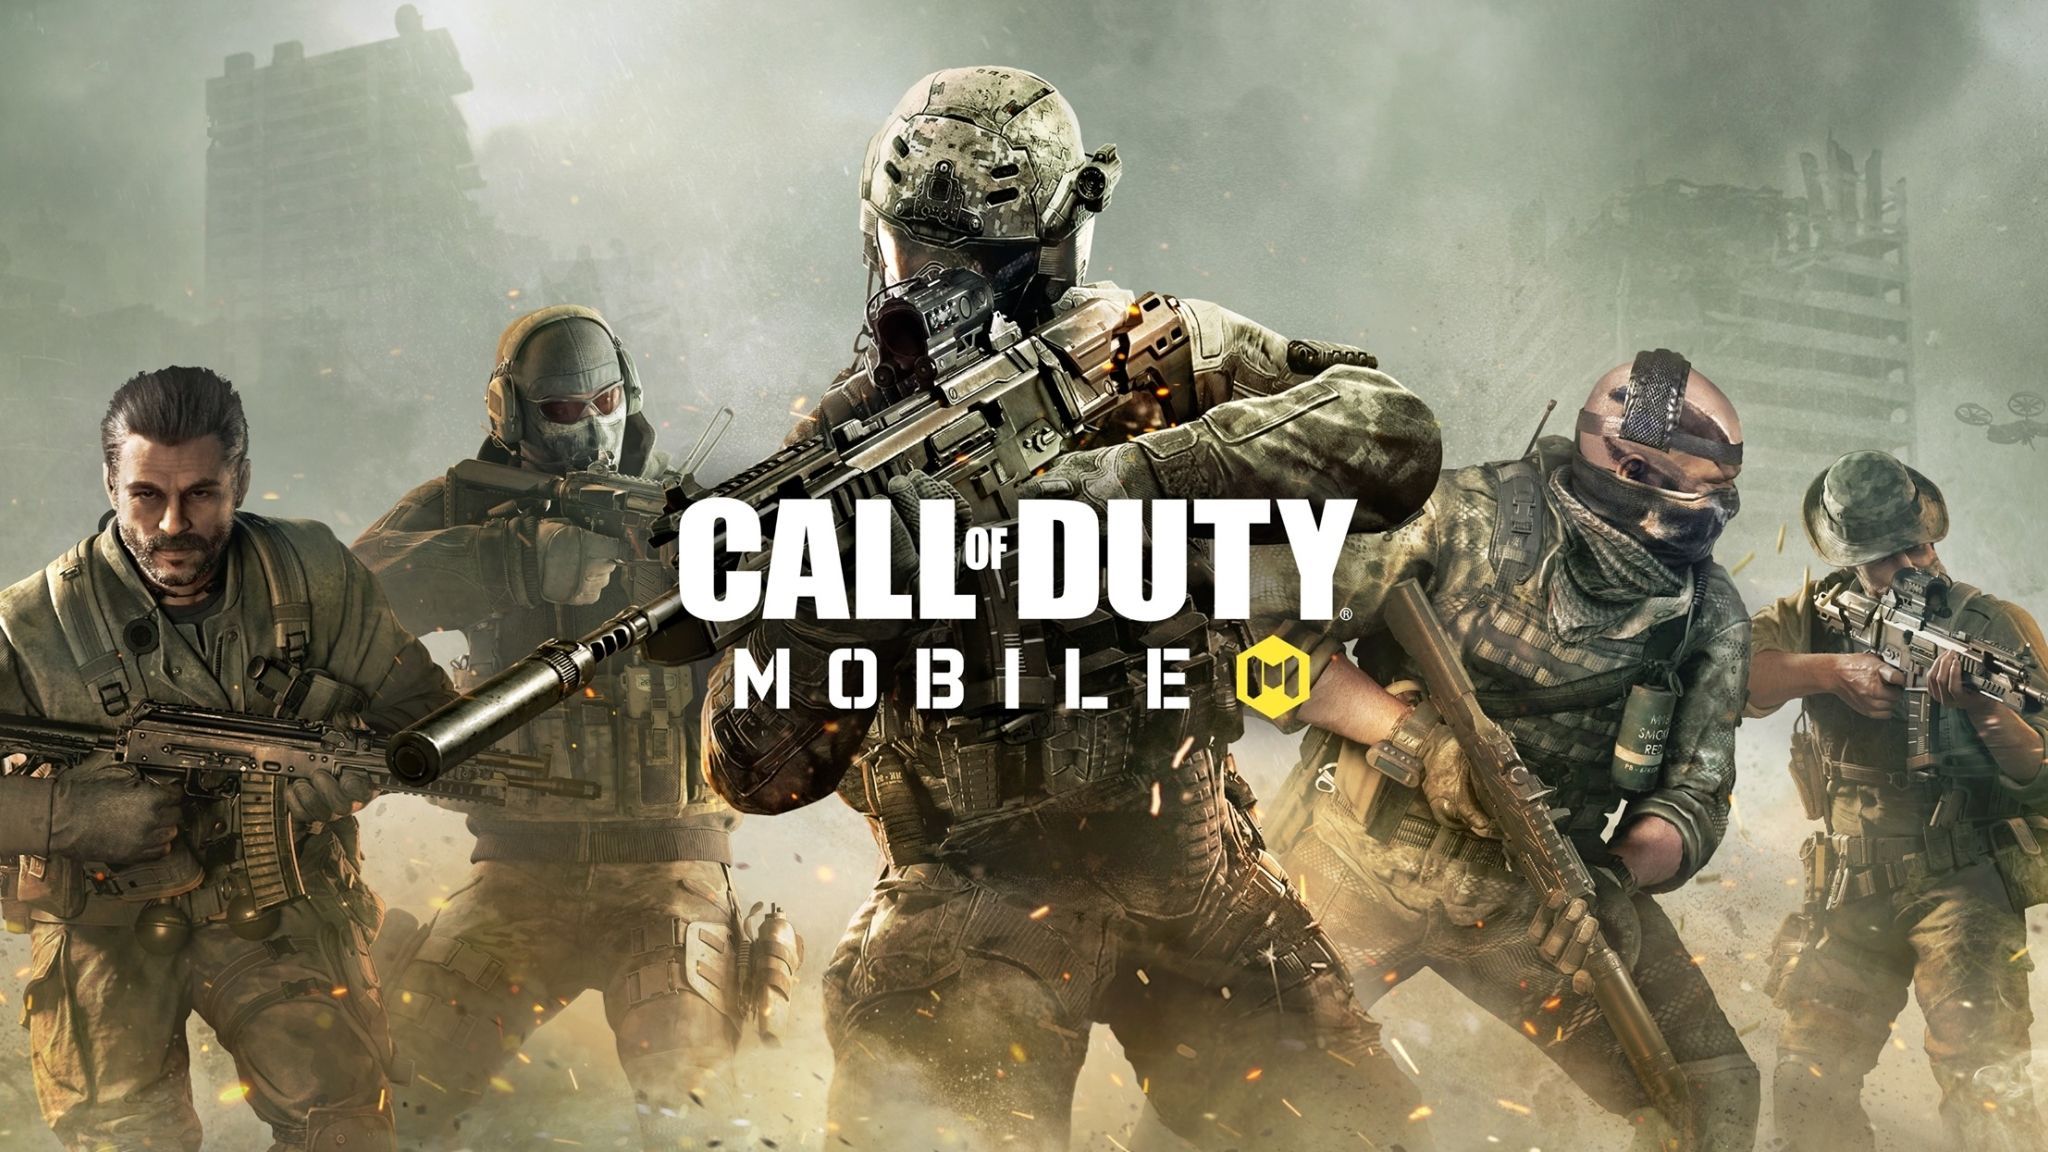 120+] Download Call of Duty Wallpapers for Desktop & Mobile (FHD)